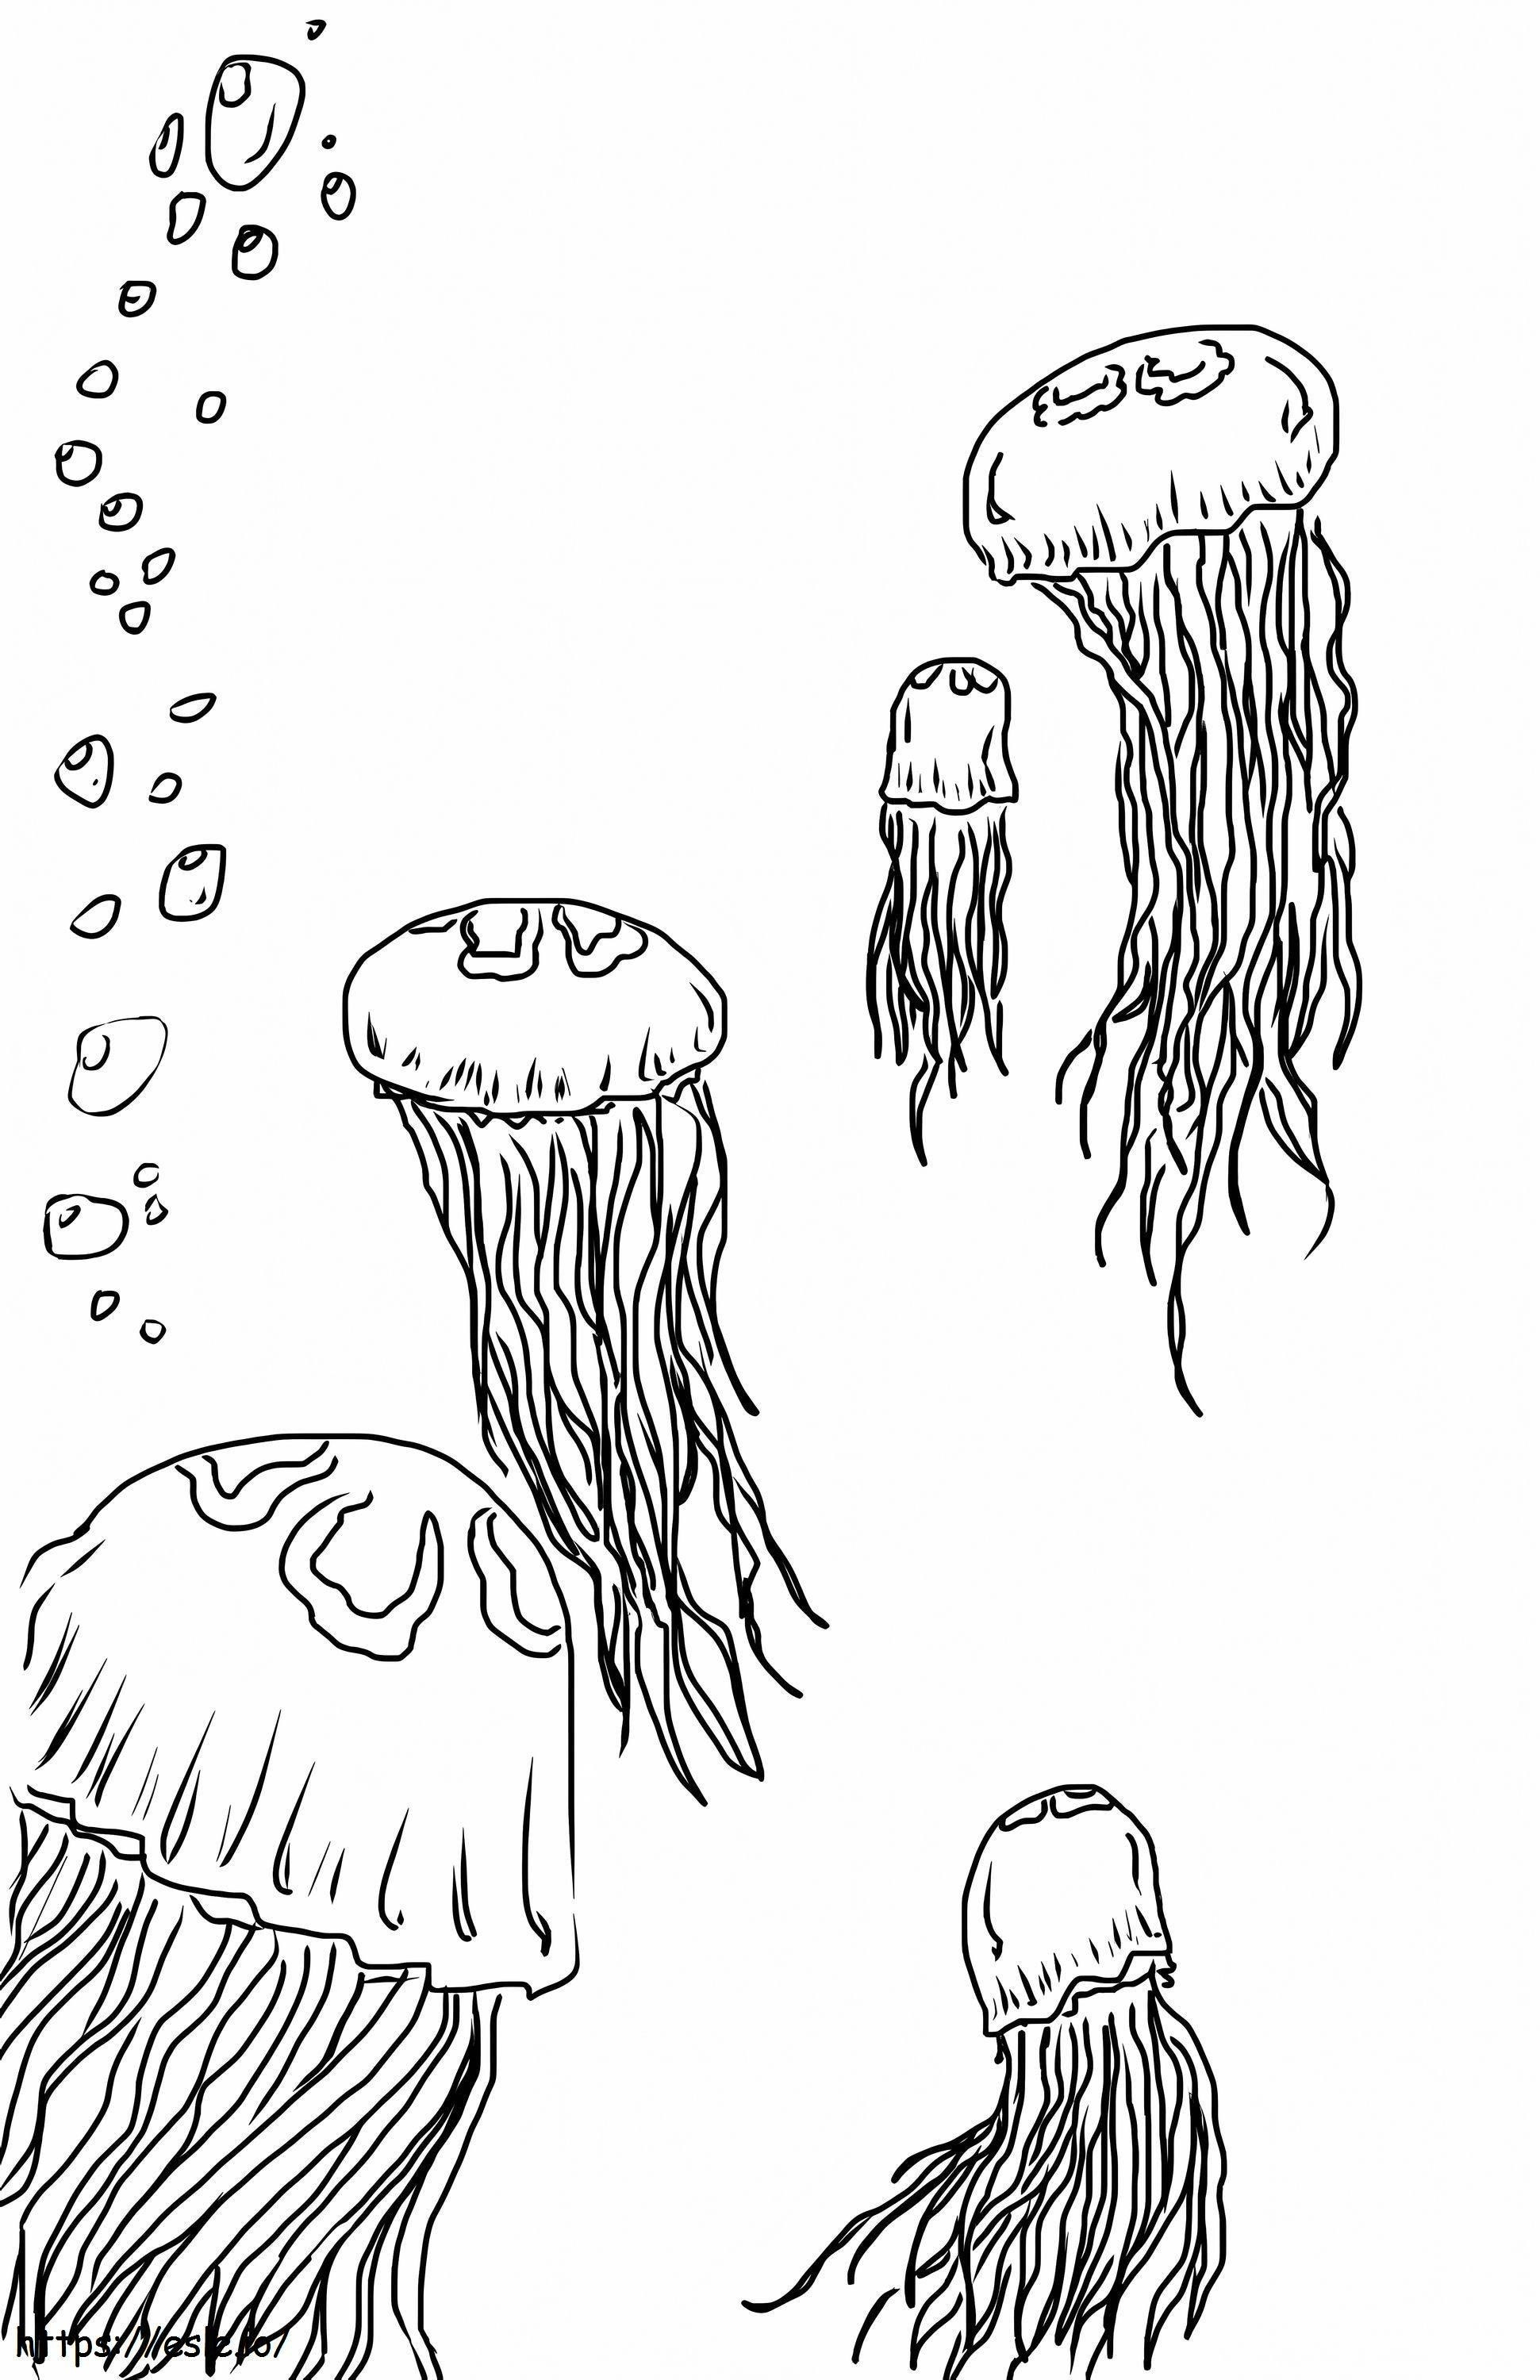 Five Jellyfish coloring page